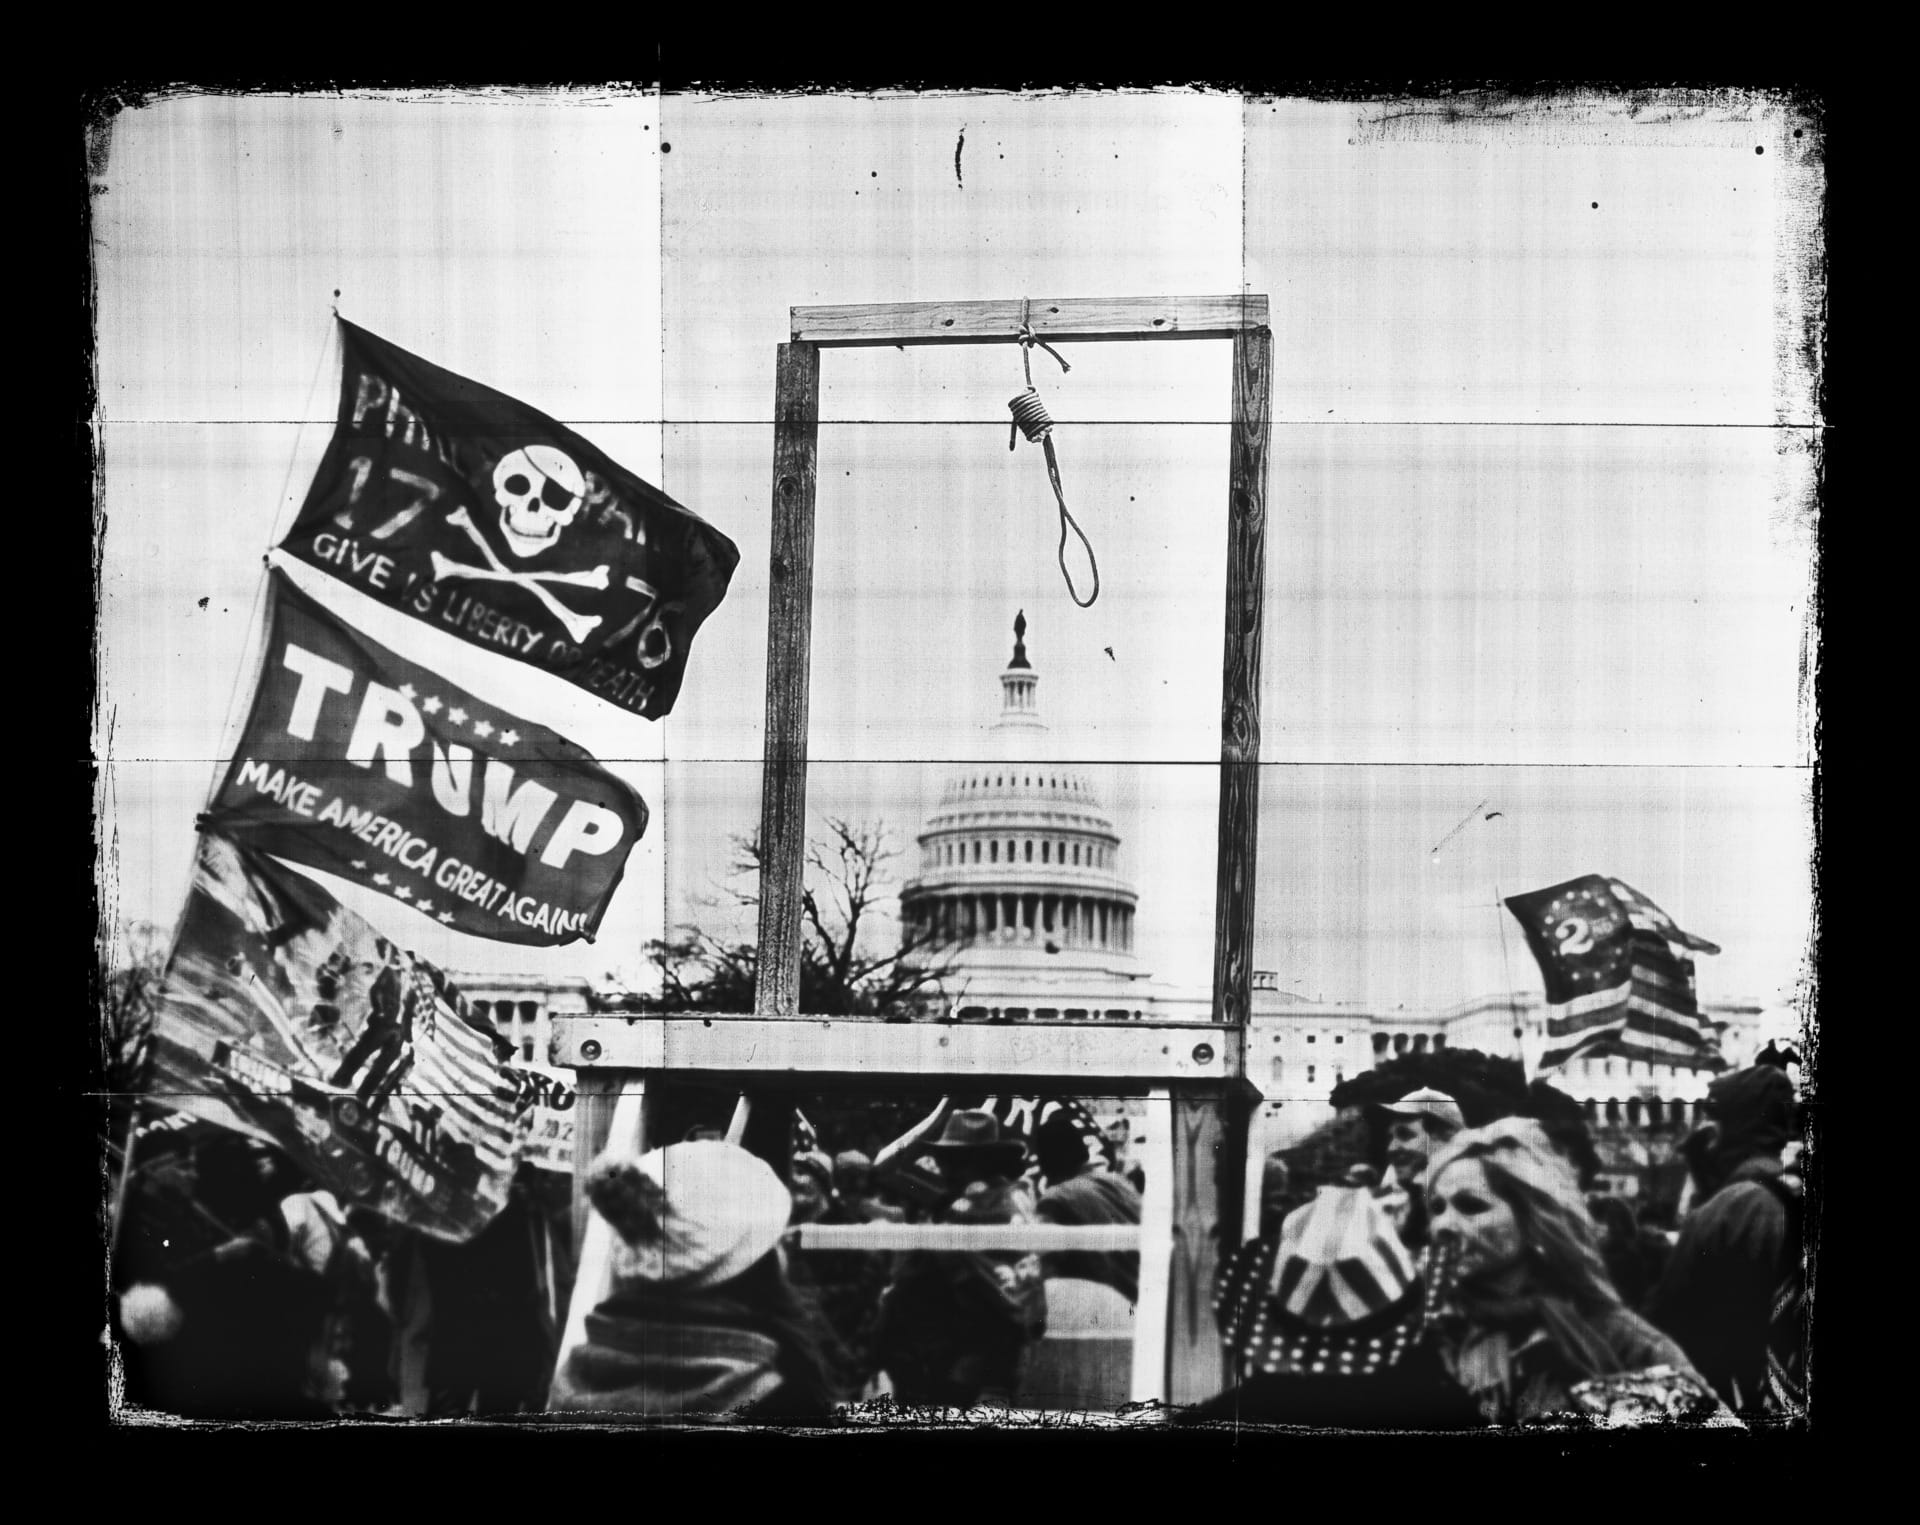 Image which features a black and white photograph of a crowd, with political banners, and a wooden gallows with a rope noose, framing the dome of the Capitol building in the distance. Flags visible to the left of the image show a skull and crossbones and read "Trump Make America Great Again"